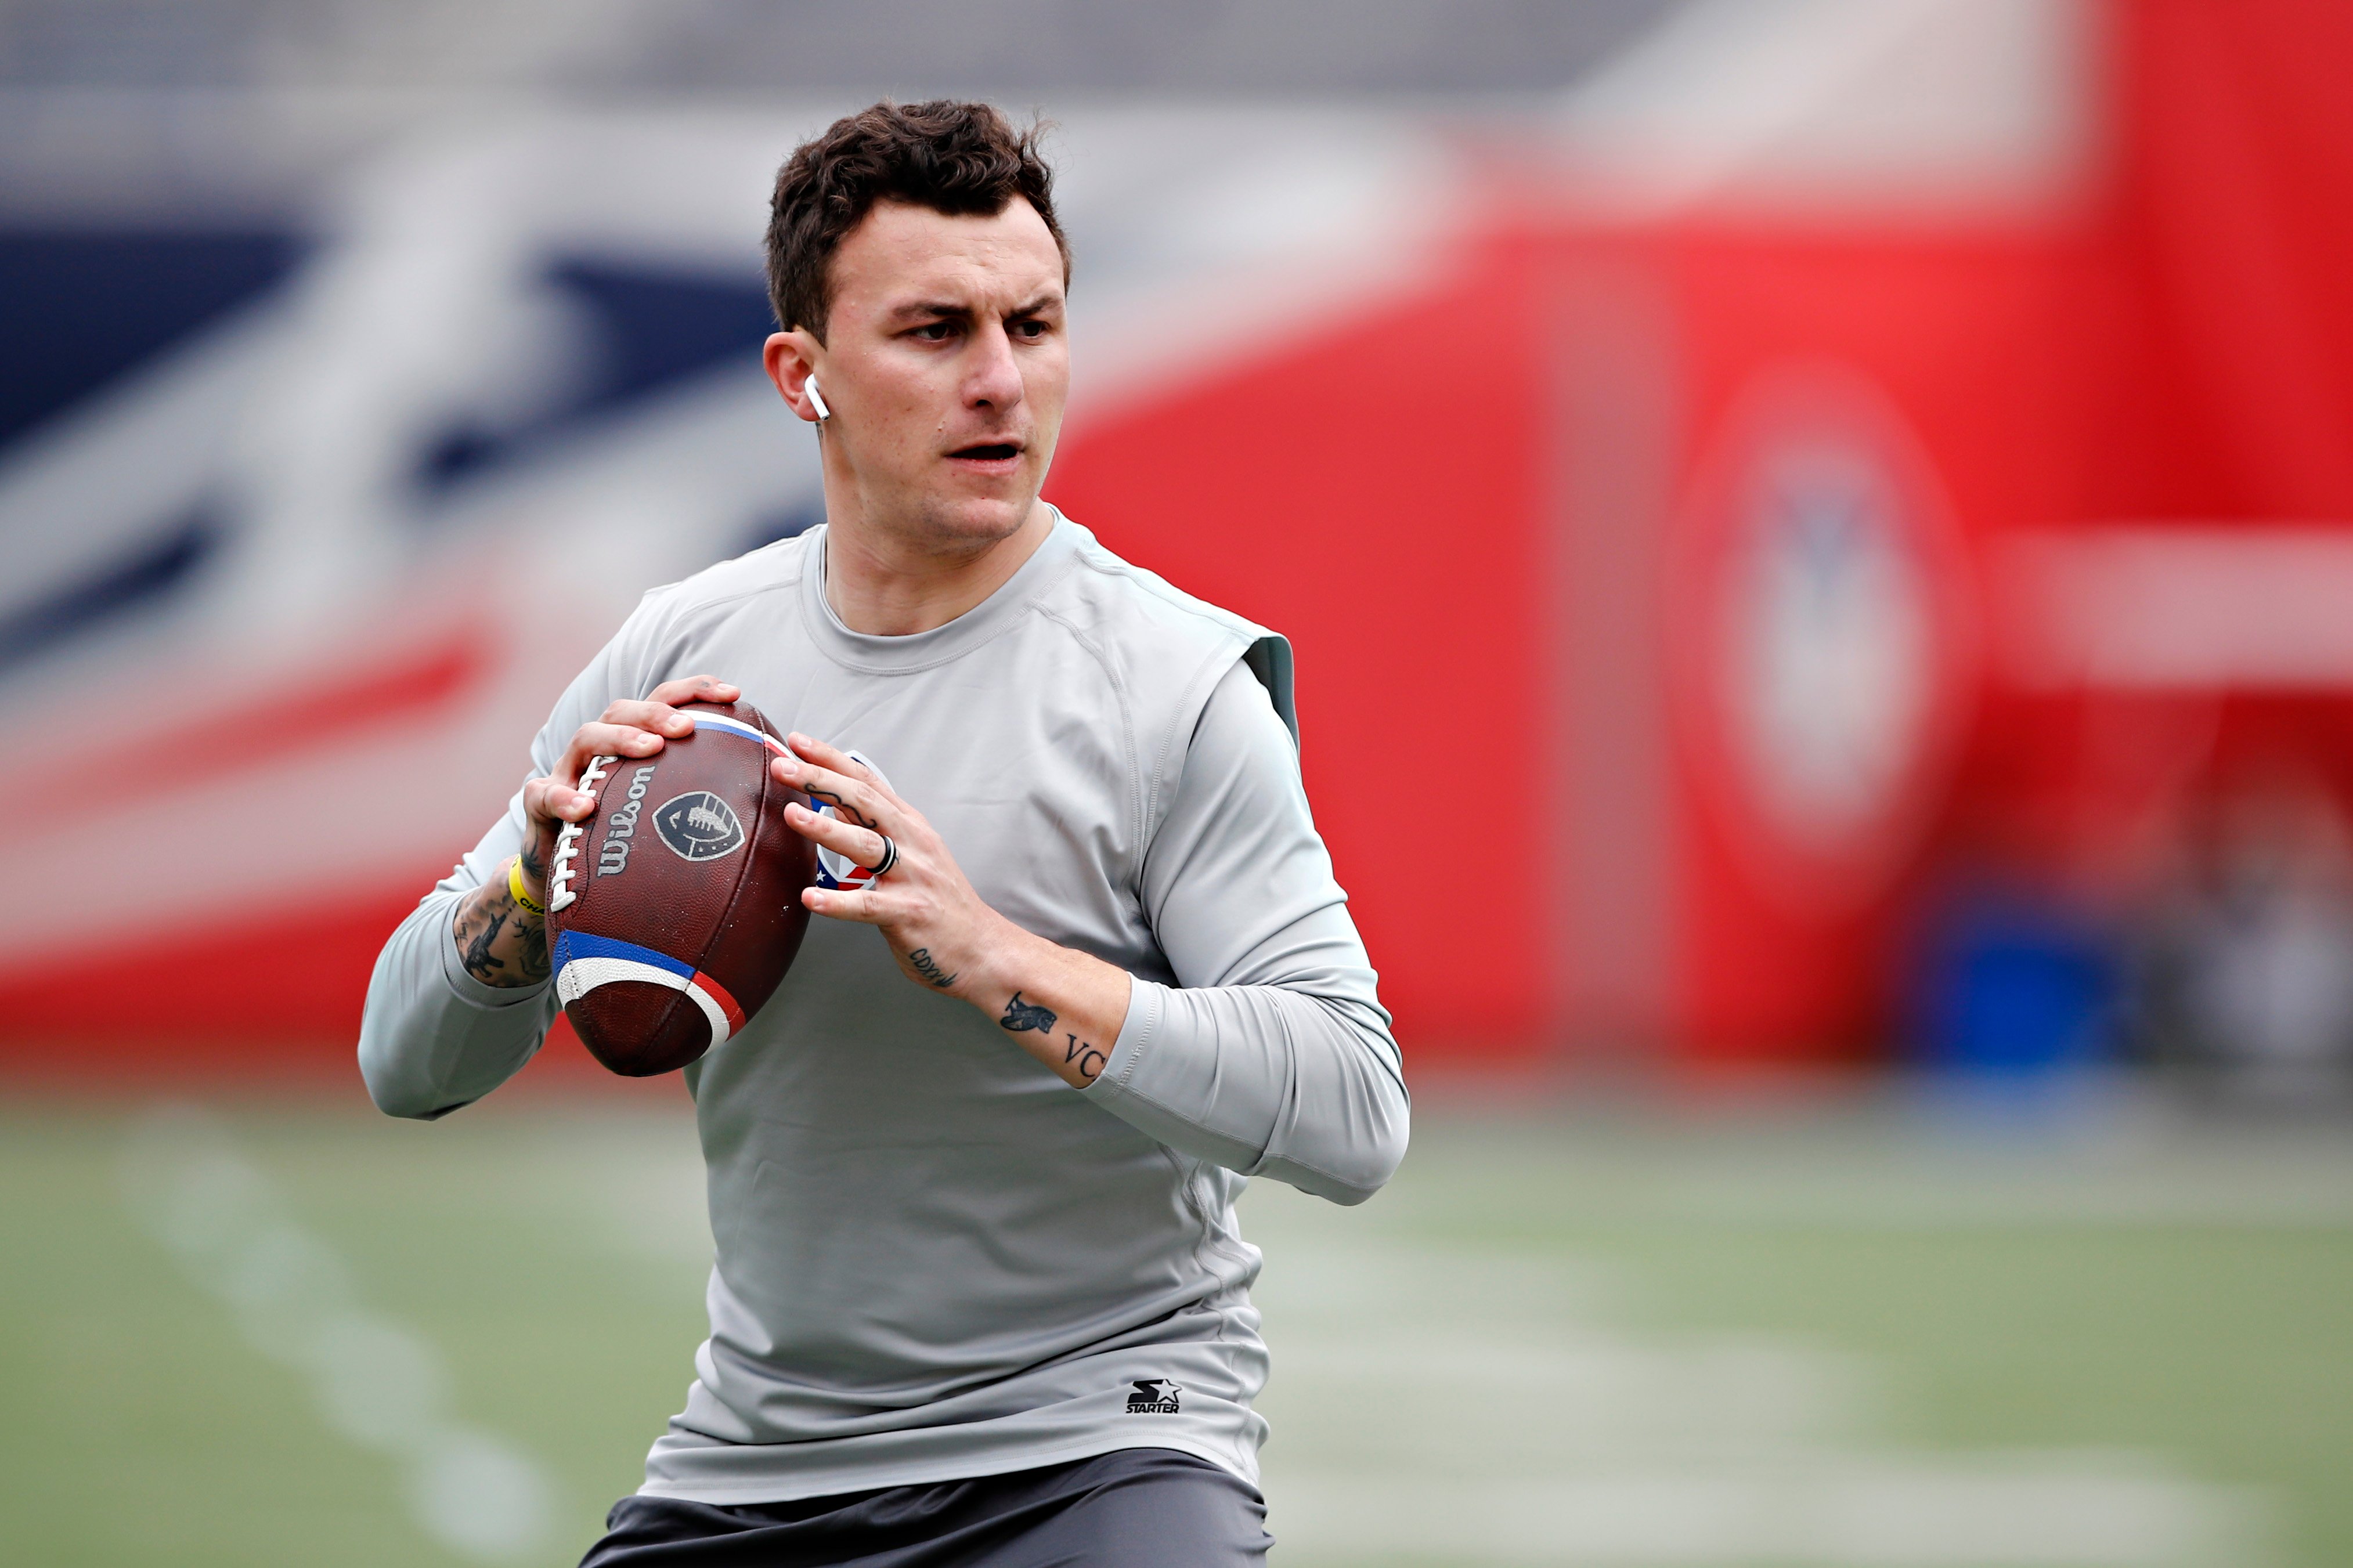 Johnny Manziel Could Be Playing Football Again Very Soon, Is in Talks About Resuming His Career